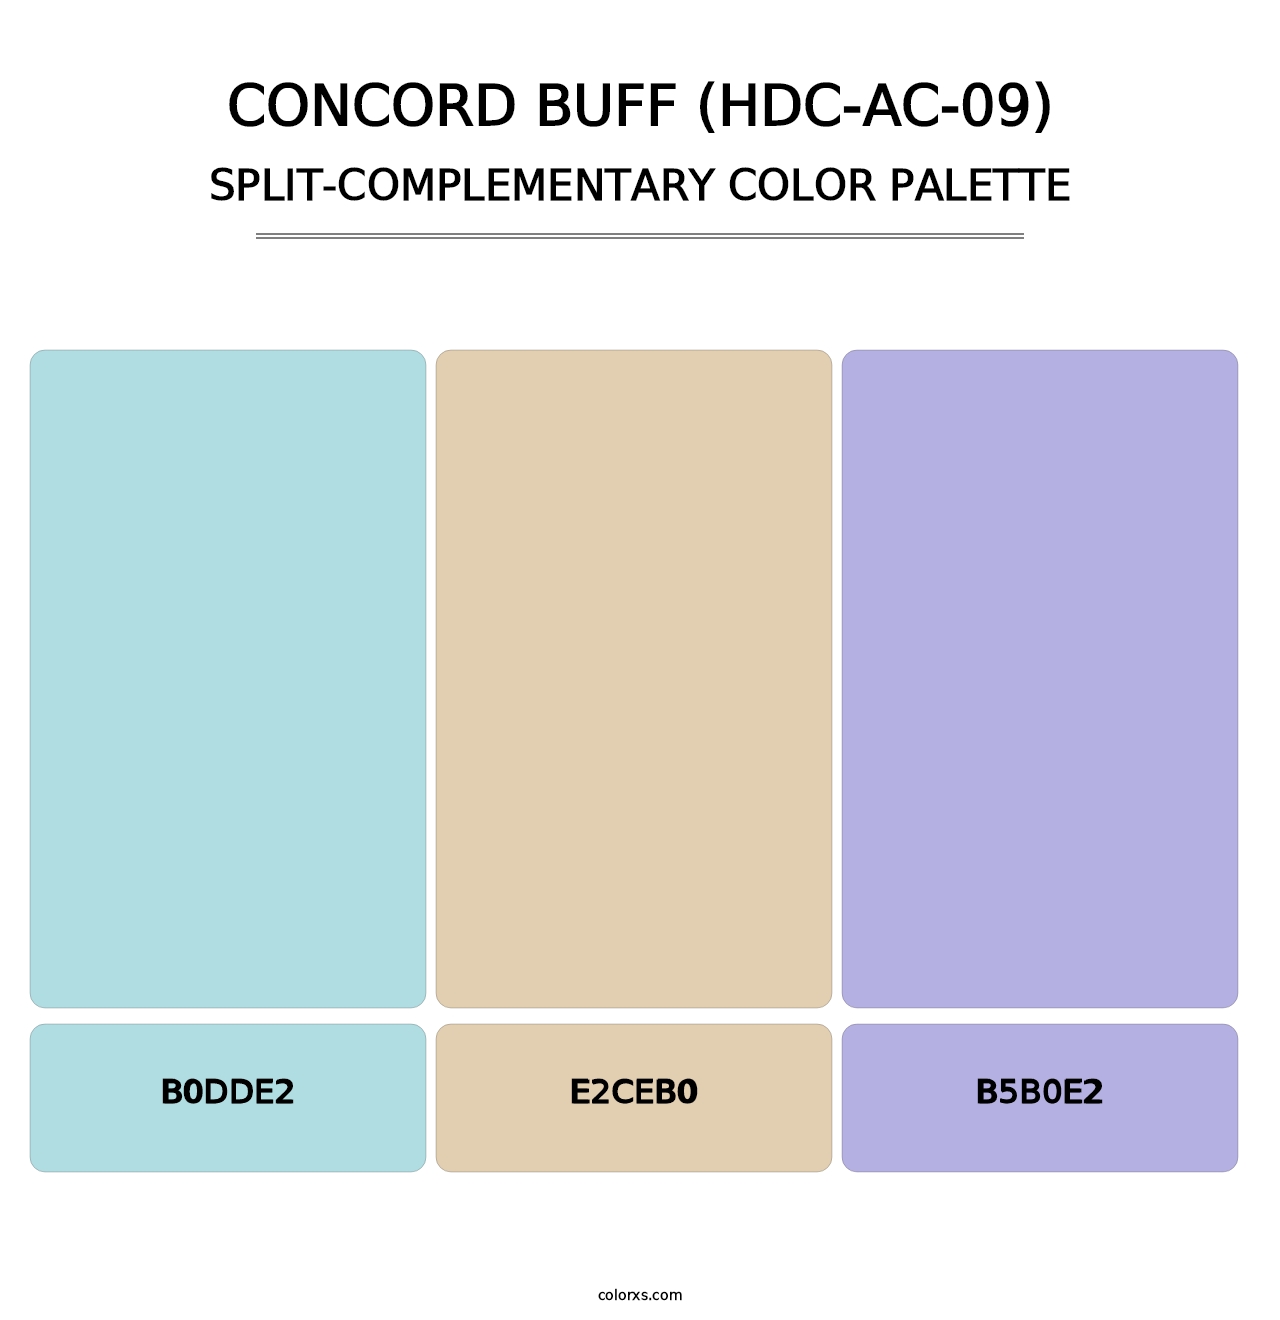 Concord Buff (HDC-AC-09) - Split-Complementary Color Palette